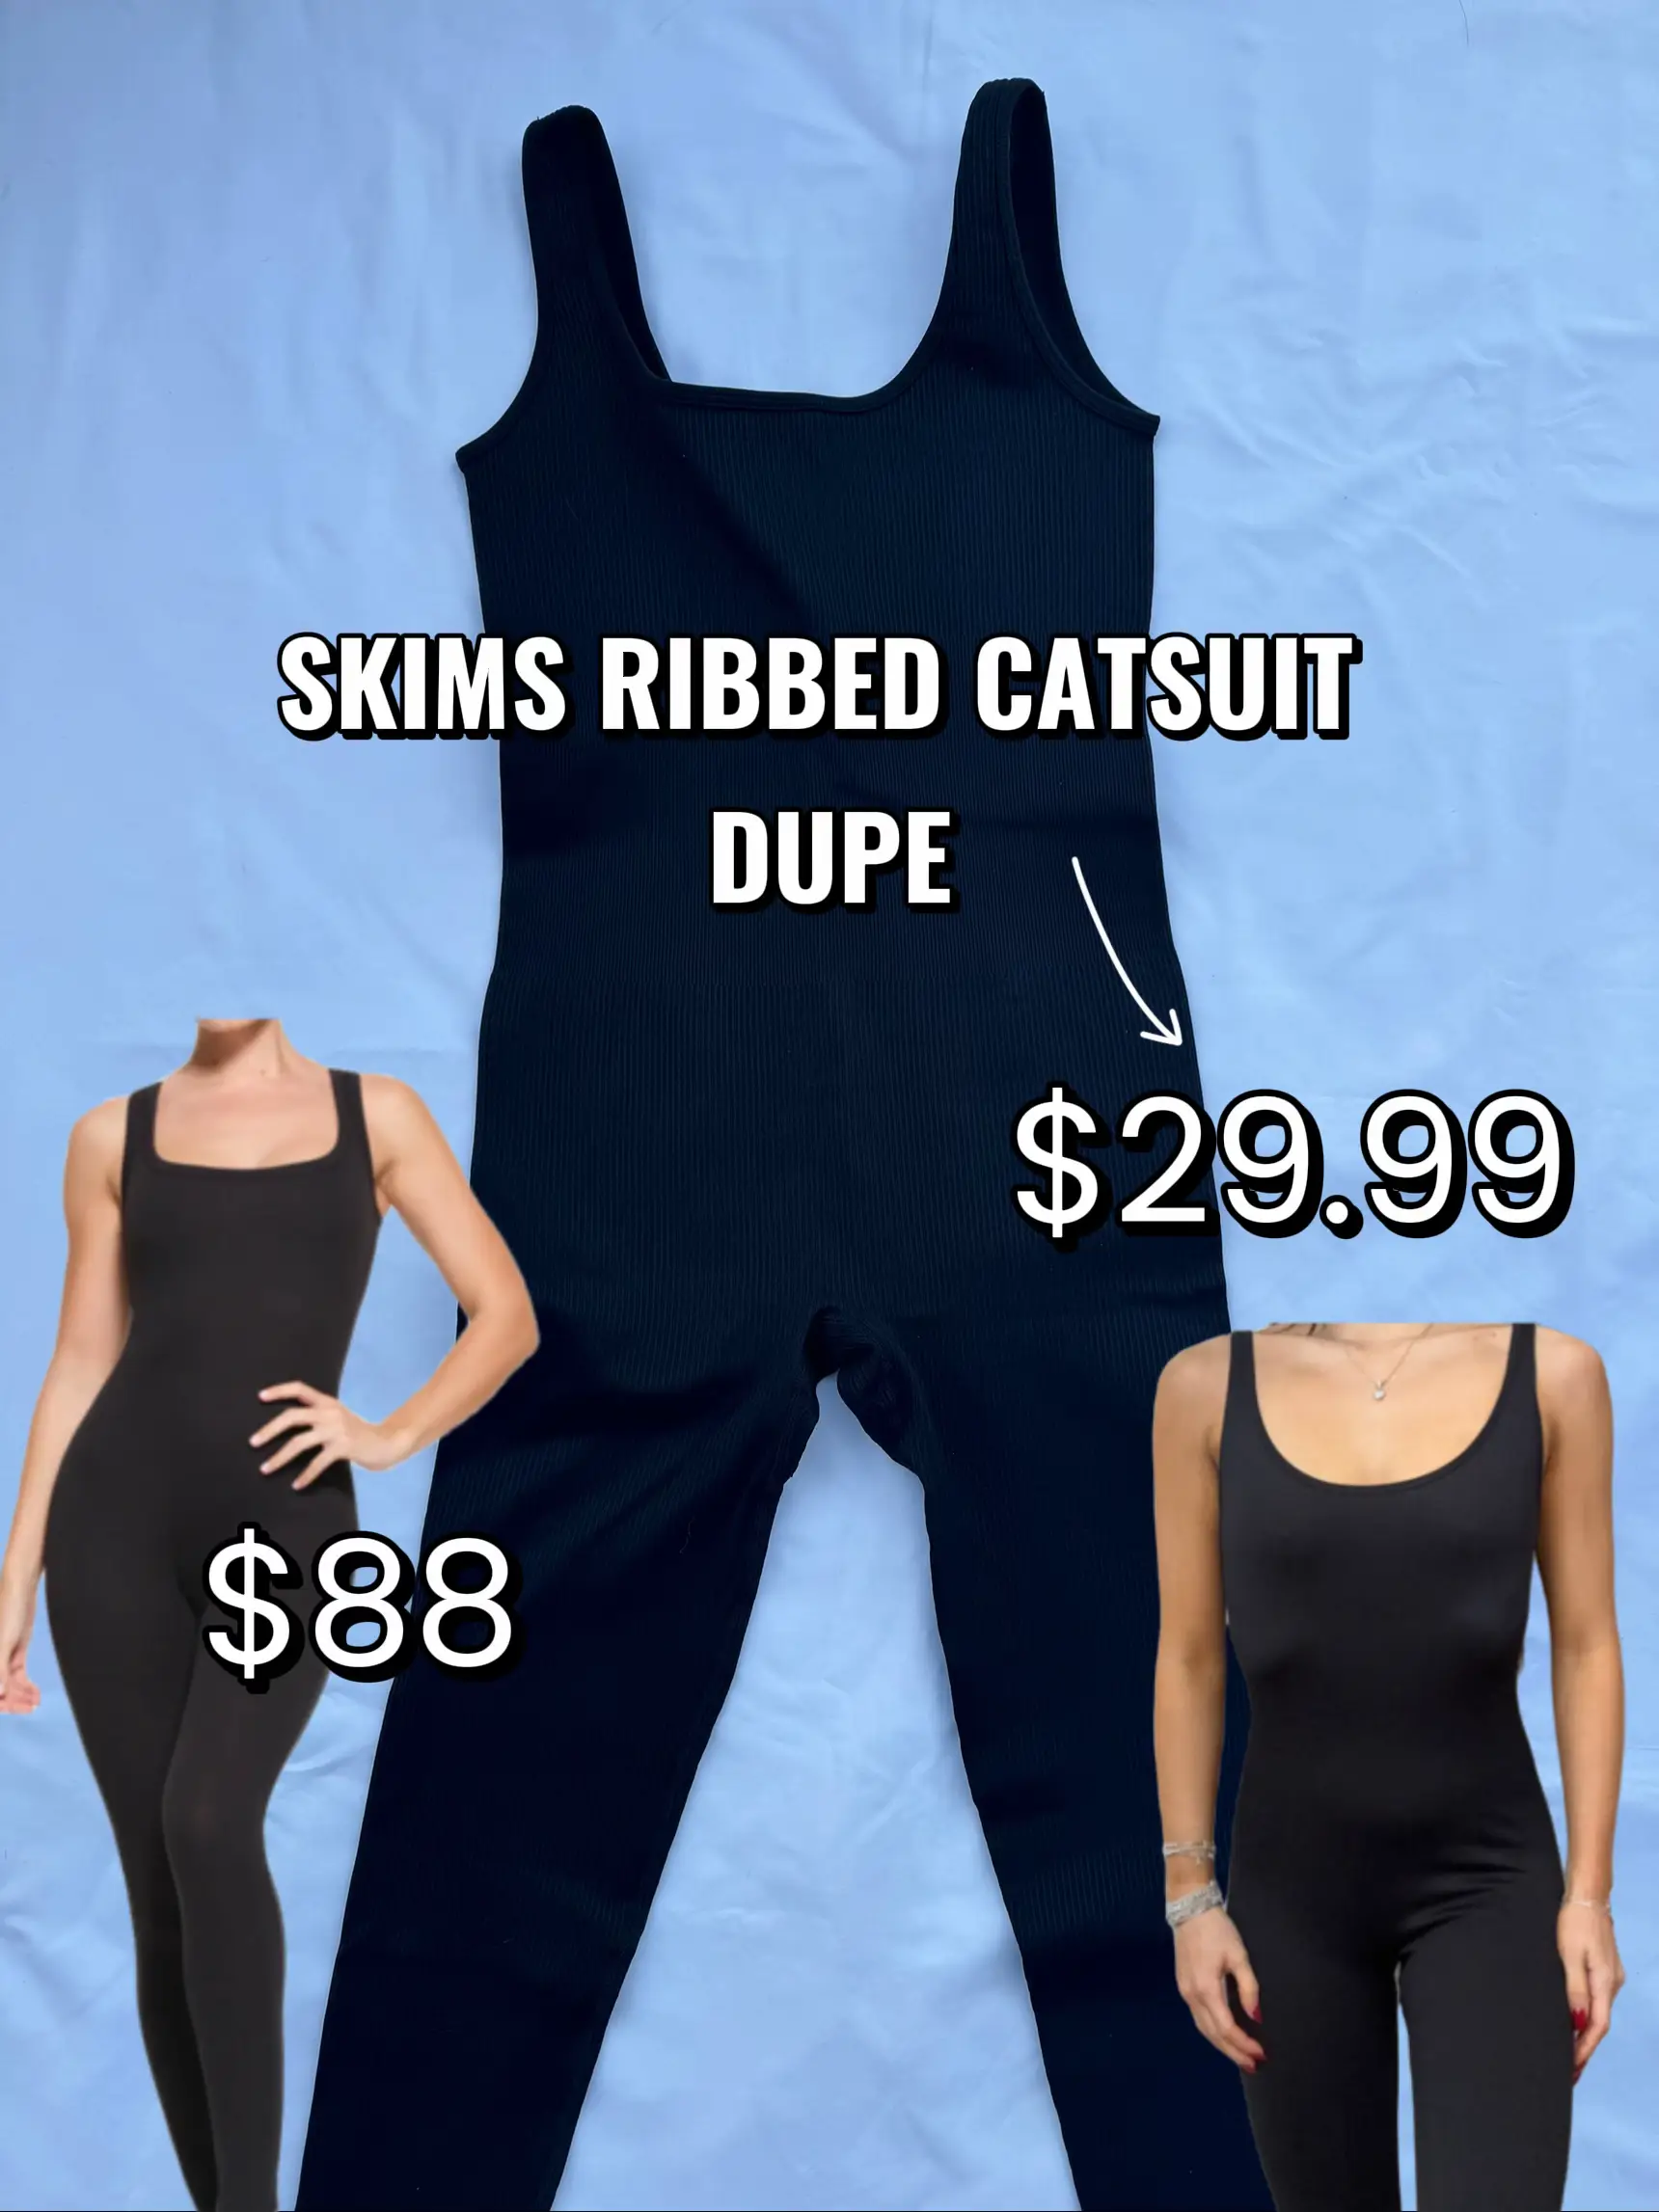 Skims Ribbed Catsuit Dupe, Gallery posted by Lexirosenstein